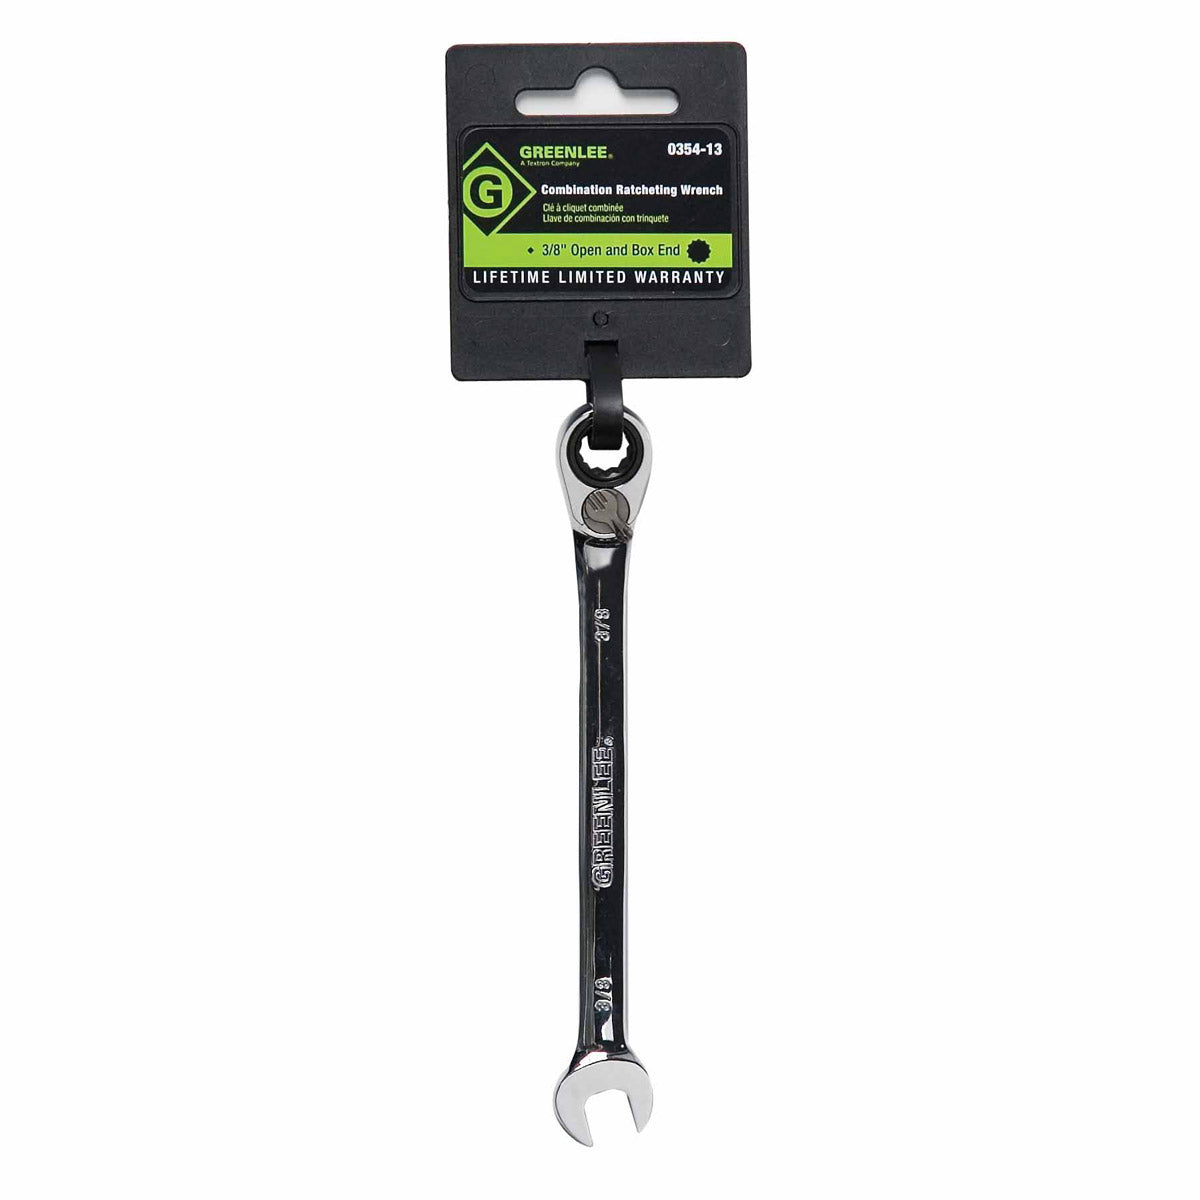 Greenlee 0354-13 Combination Ratcheting Wrench 3/8"